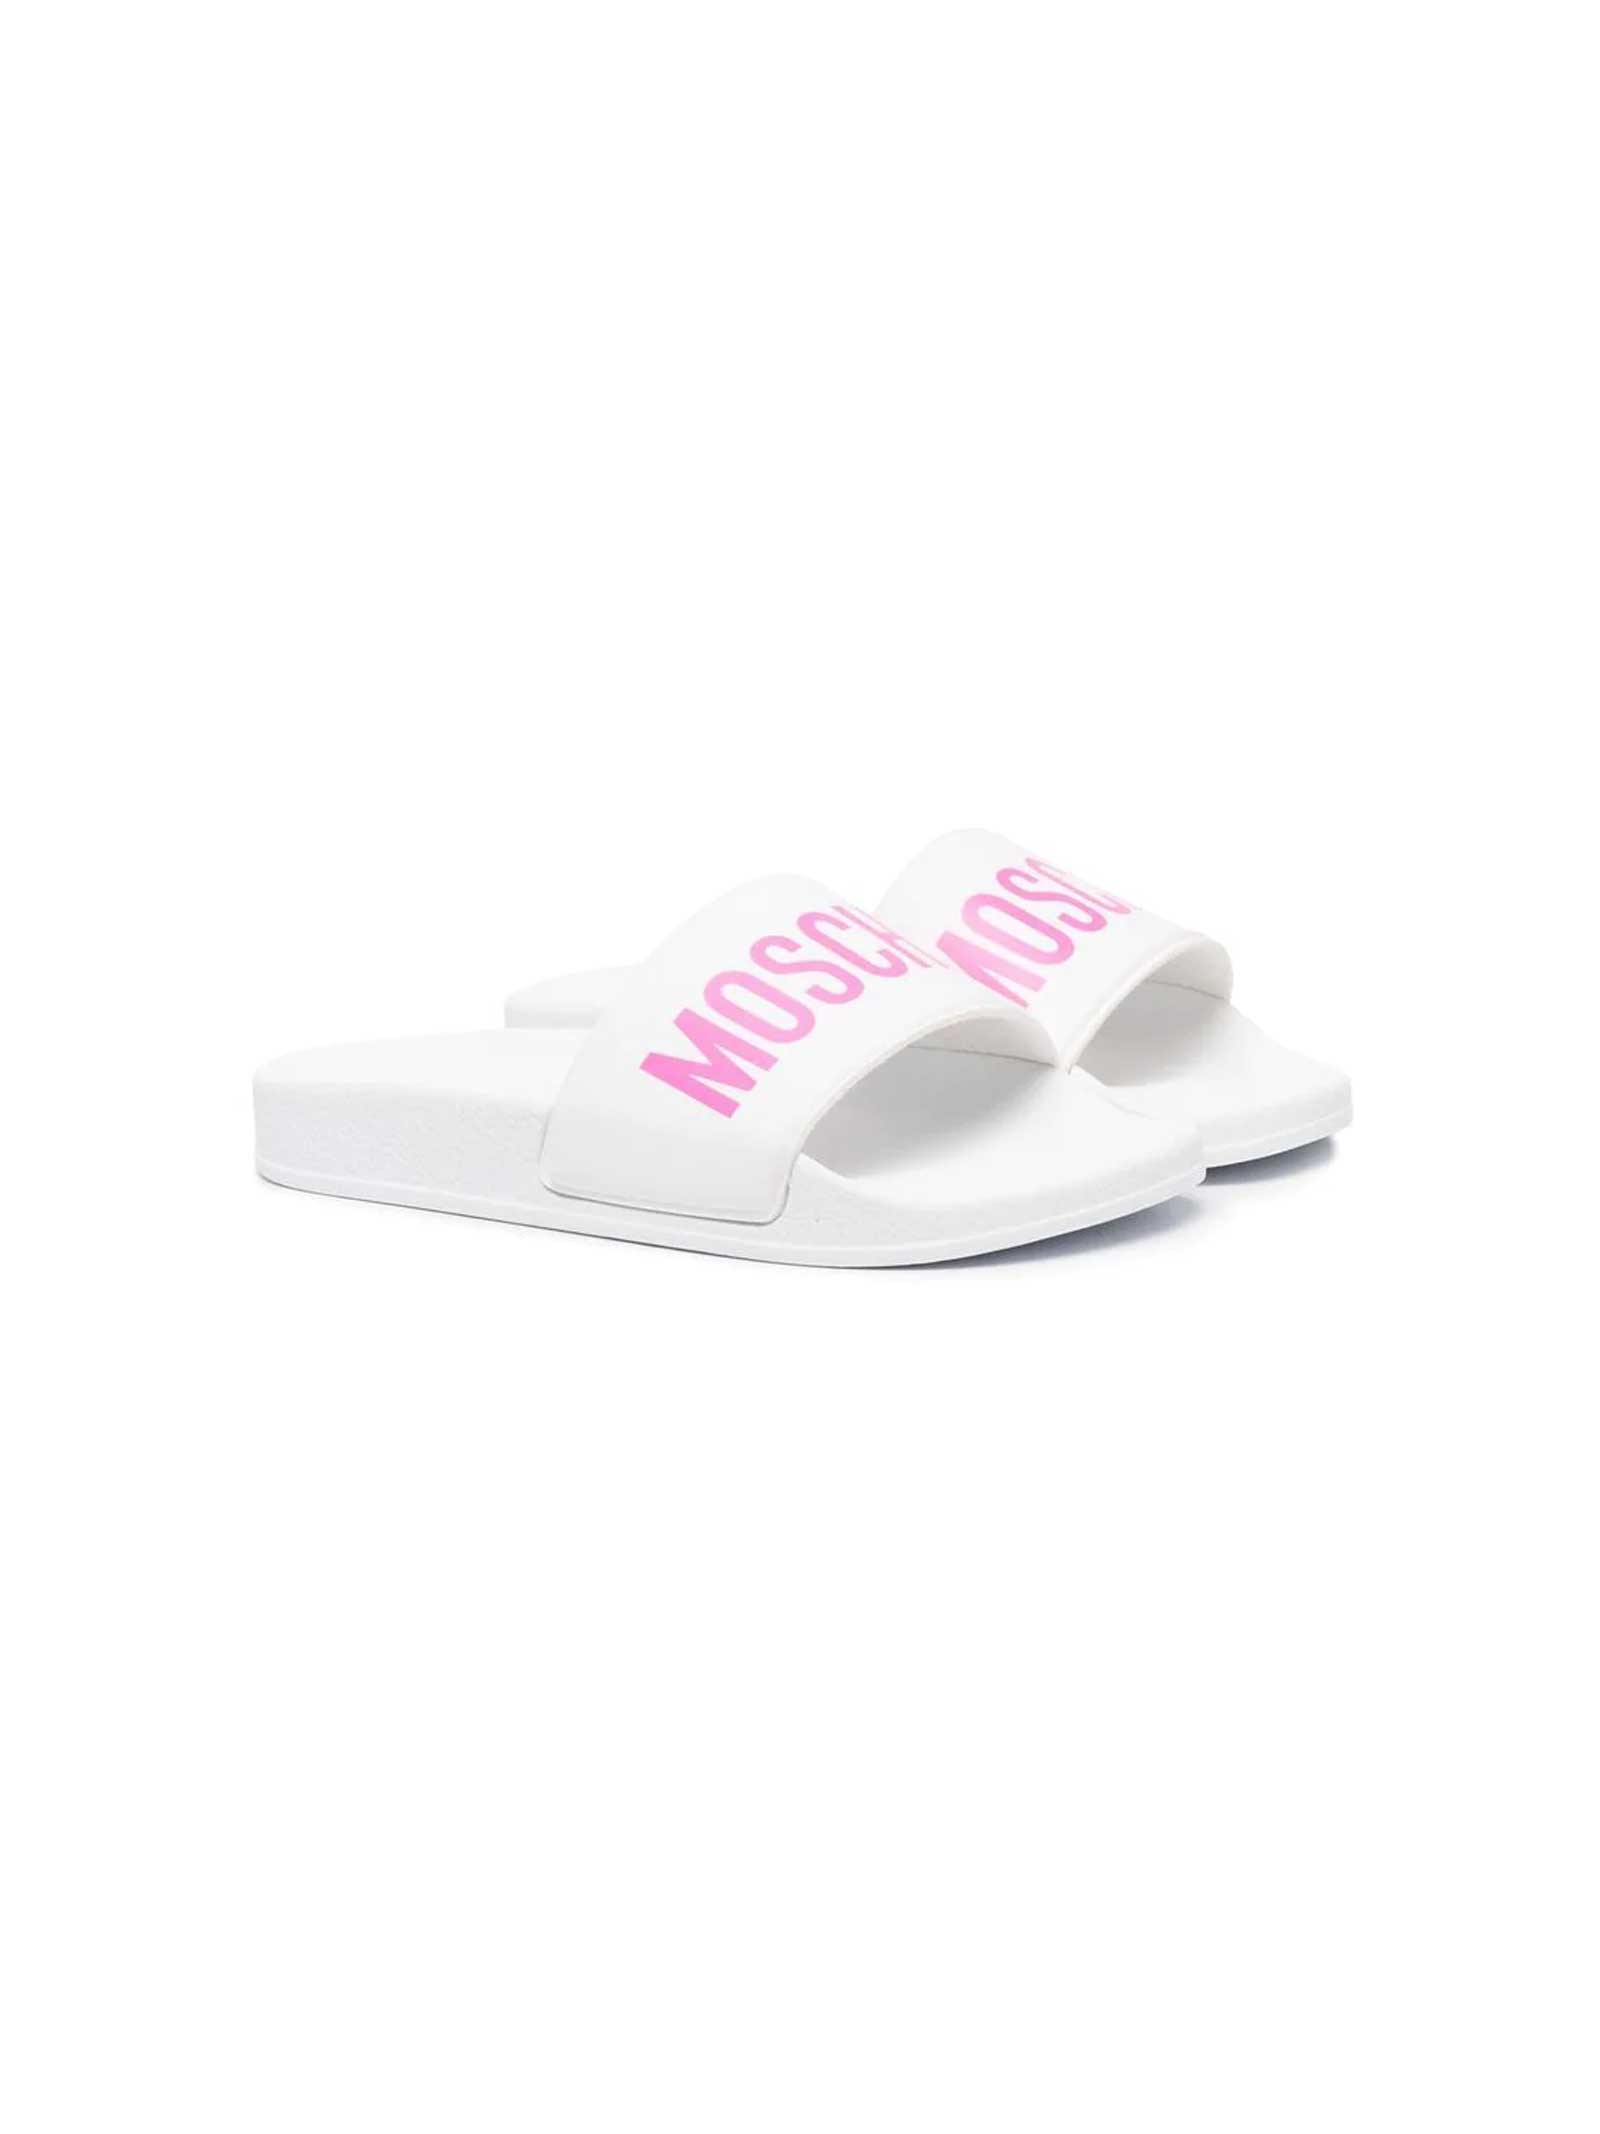 MOSCHINO WHITE SLIPPERS WITH PINK LOGO,67526 1